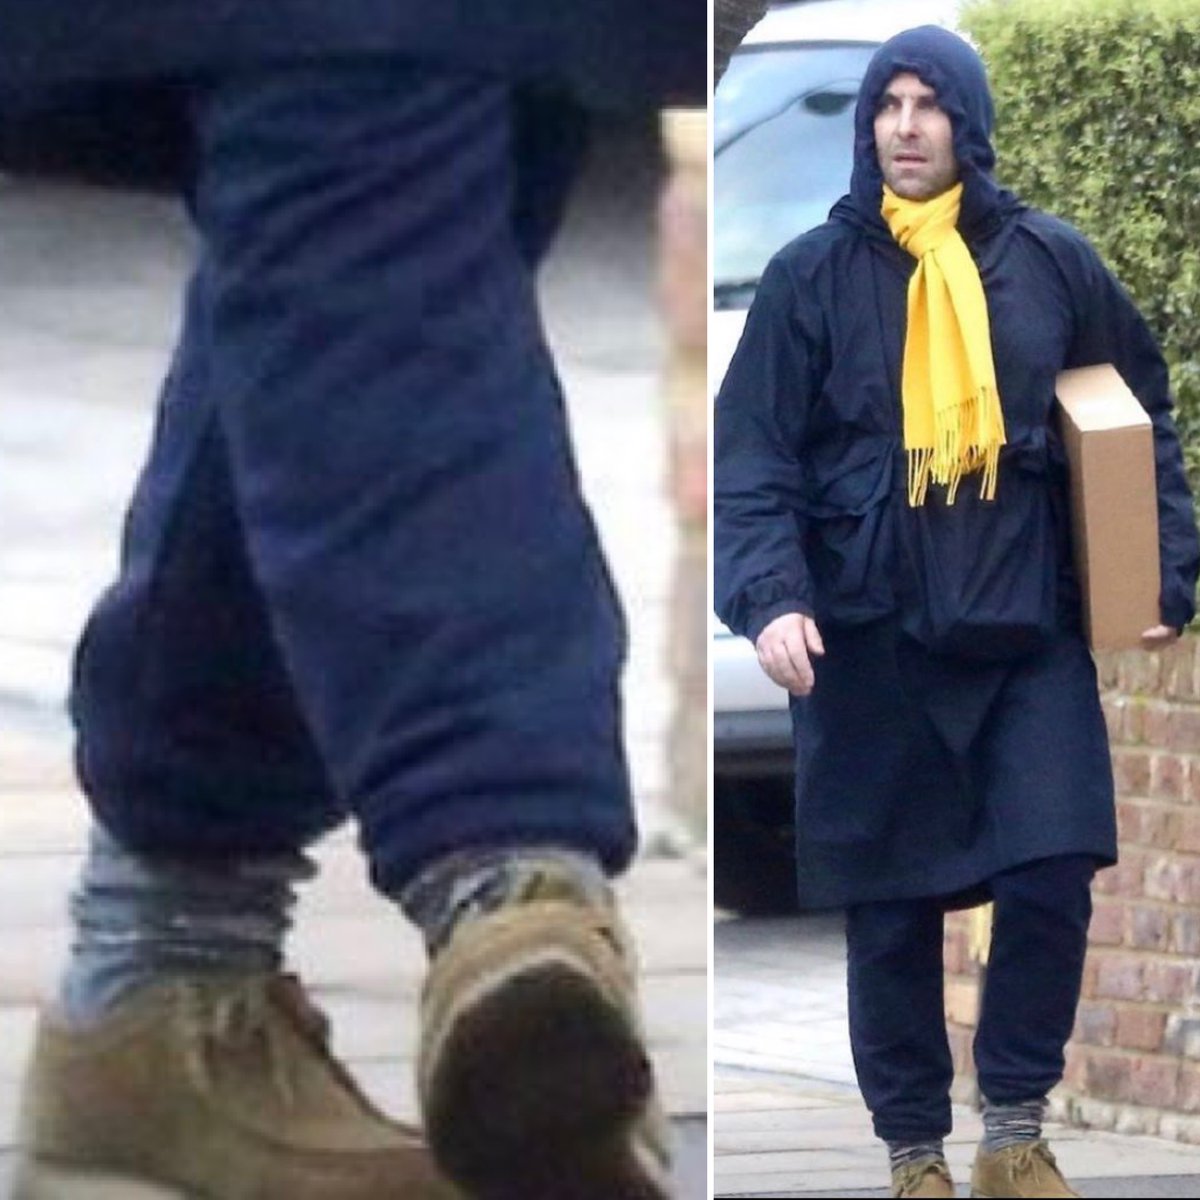 Liam Gallagher on Twitter: "Ad. Liam wears Clarks Originals Wallabee shoes Available here >>> https://t.co/BPyzu3h6a6 https://t.co/D0uCjt3r0N" /